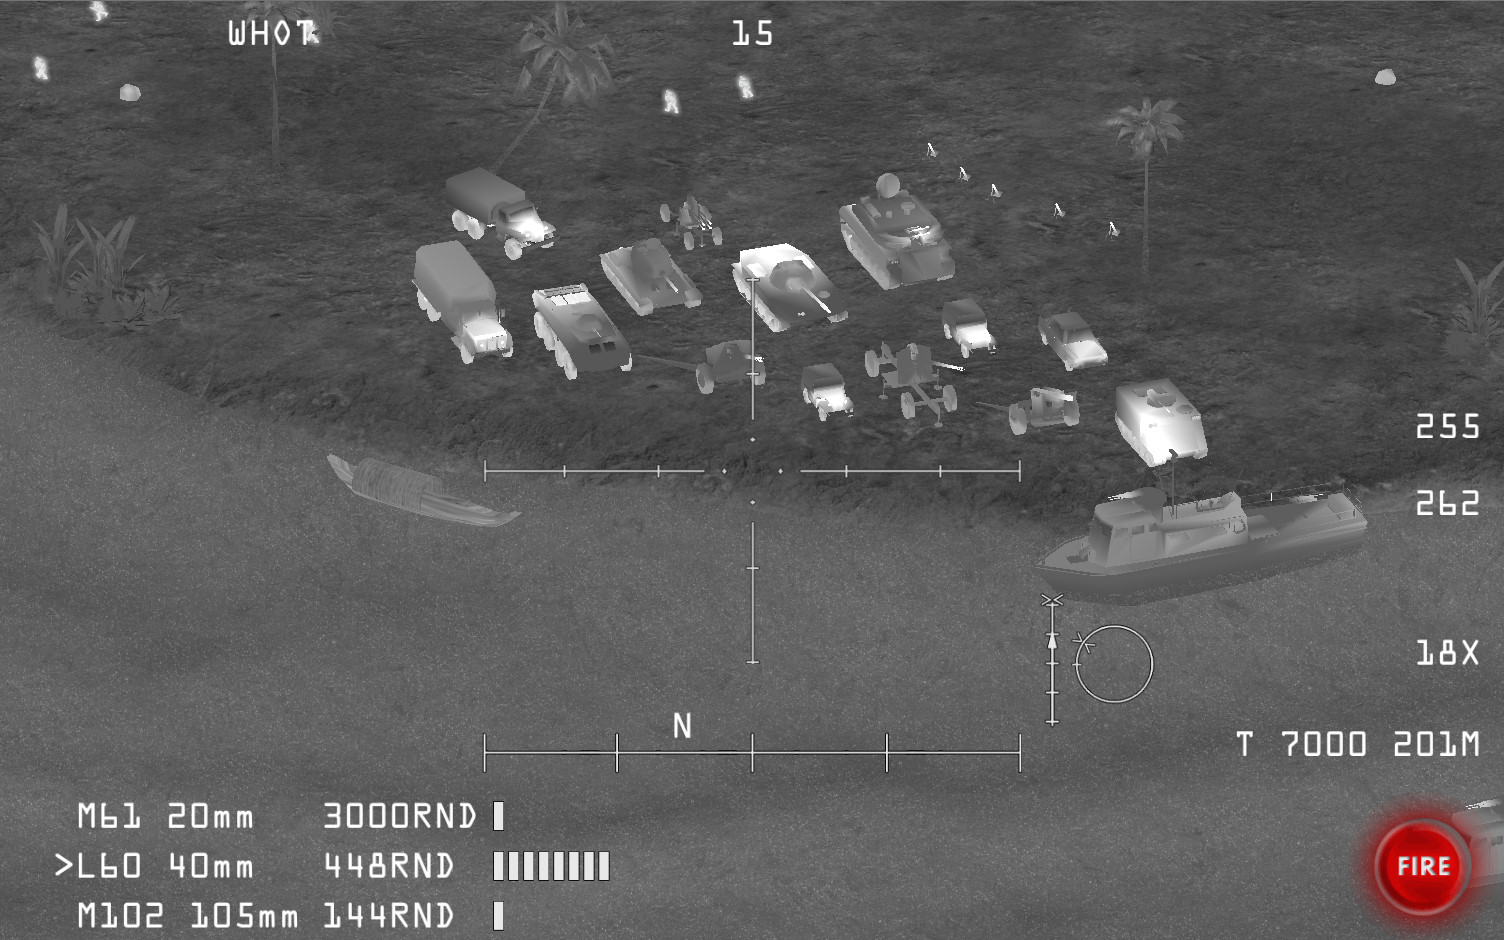 Russian military cites game screenshot as “evidence” of US ISIS support